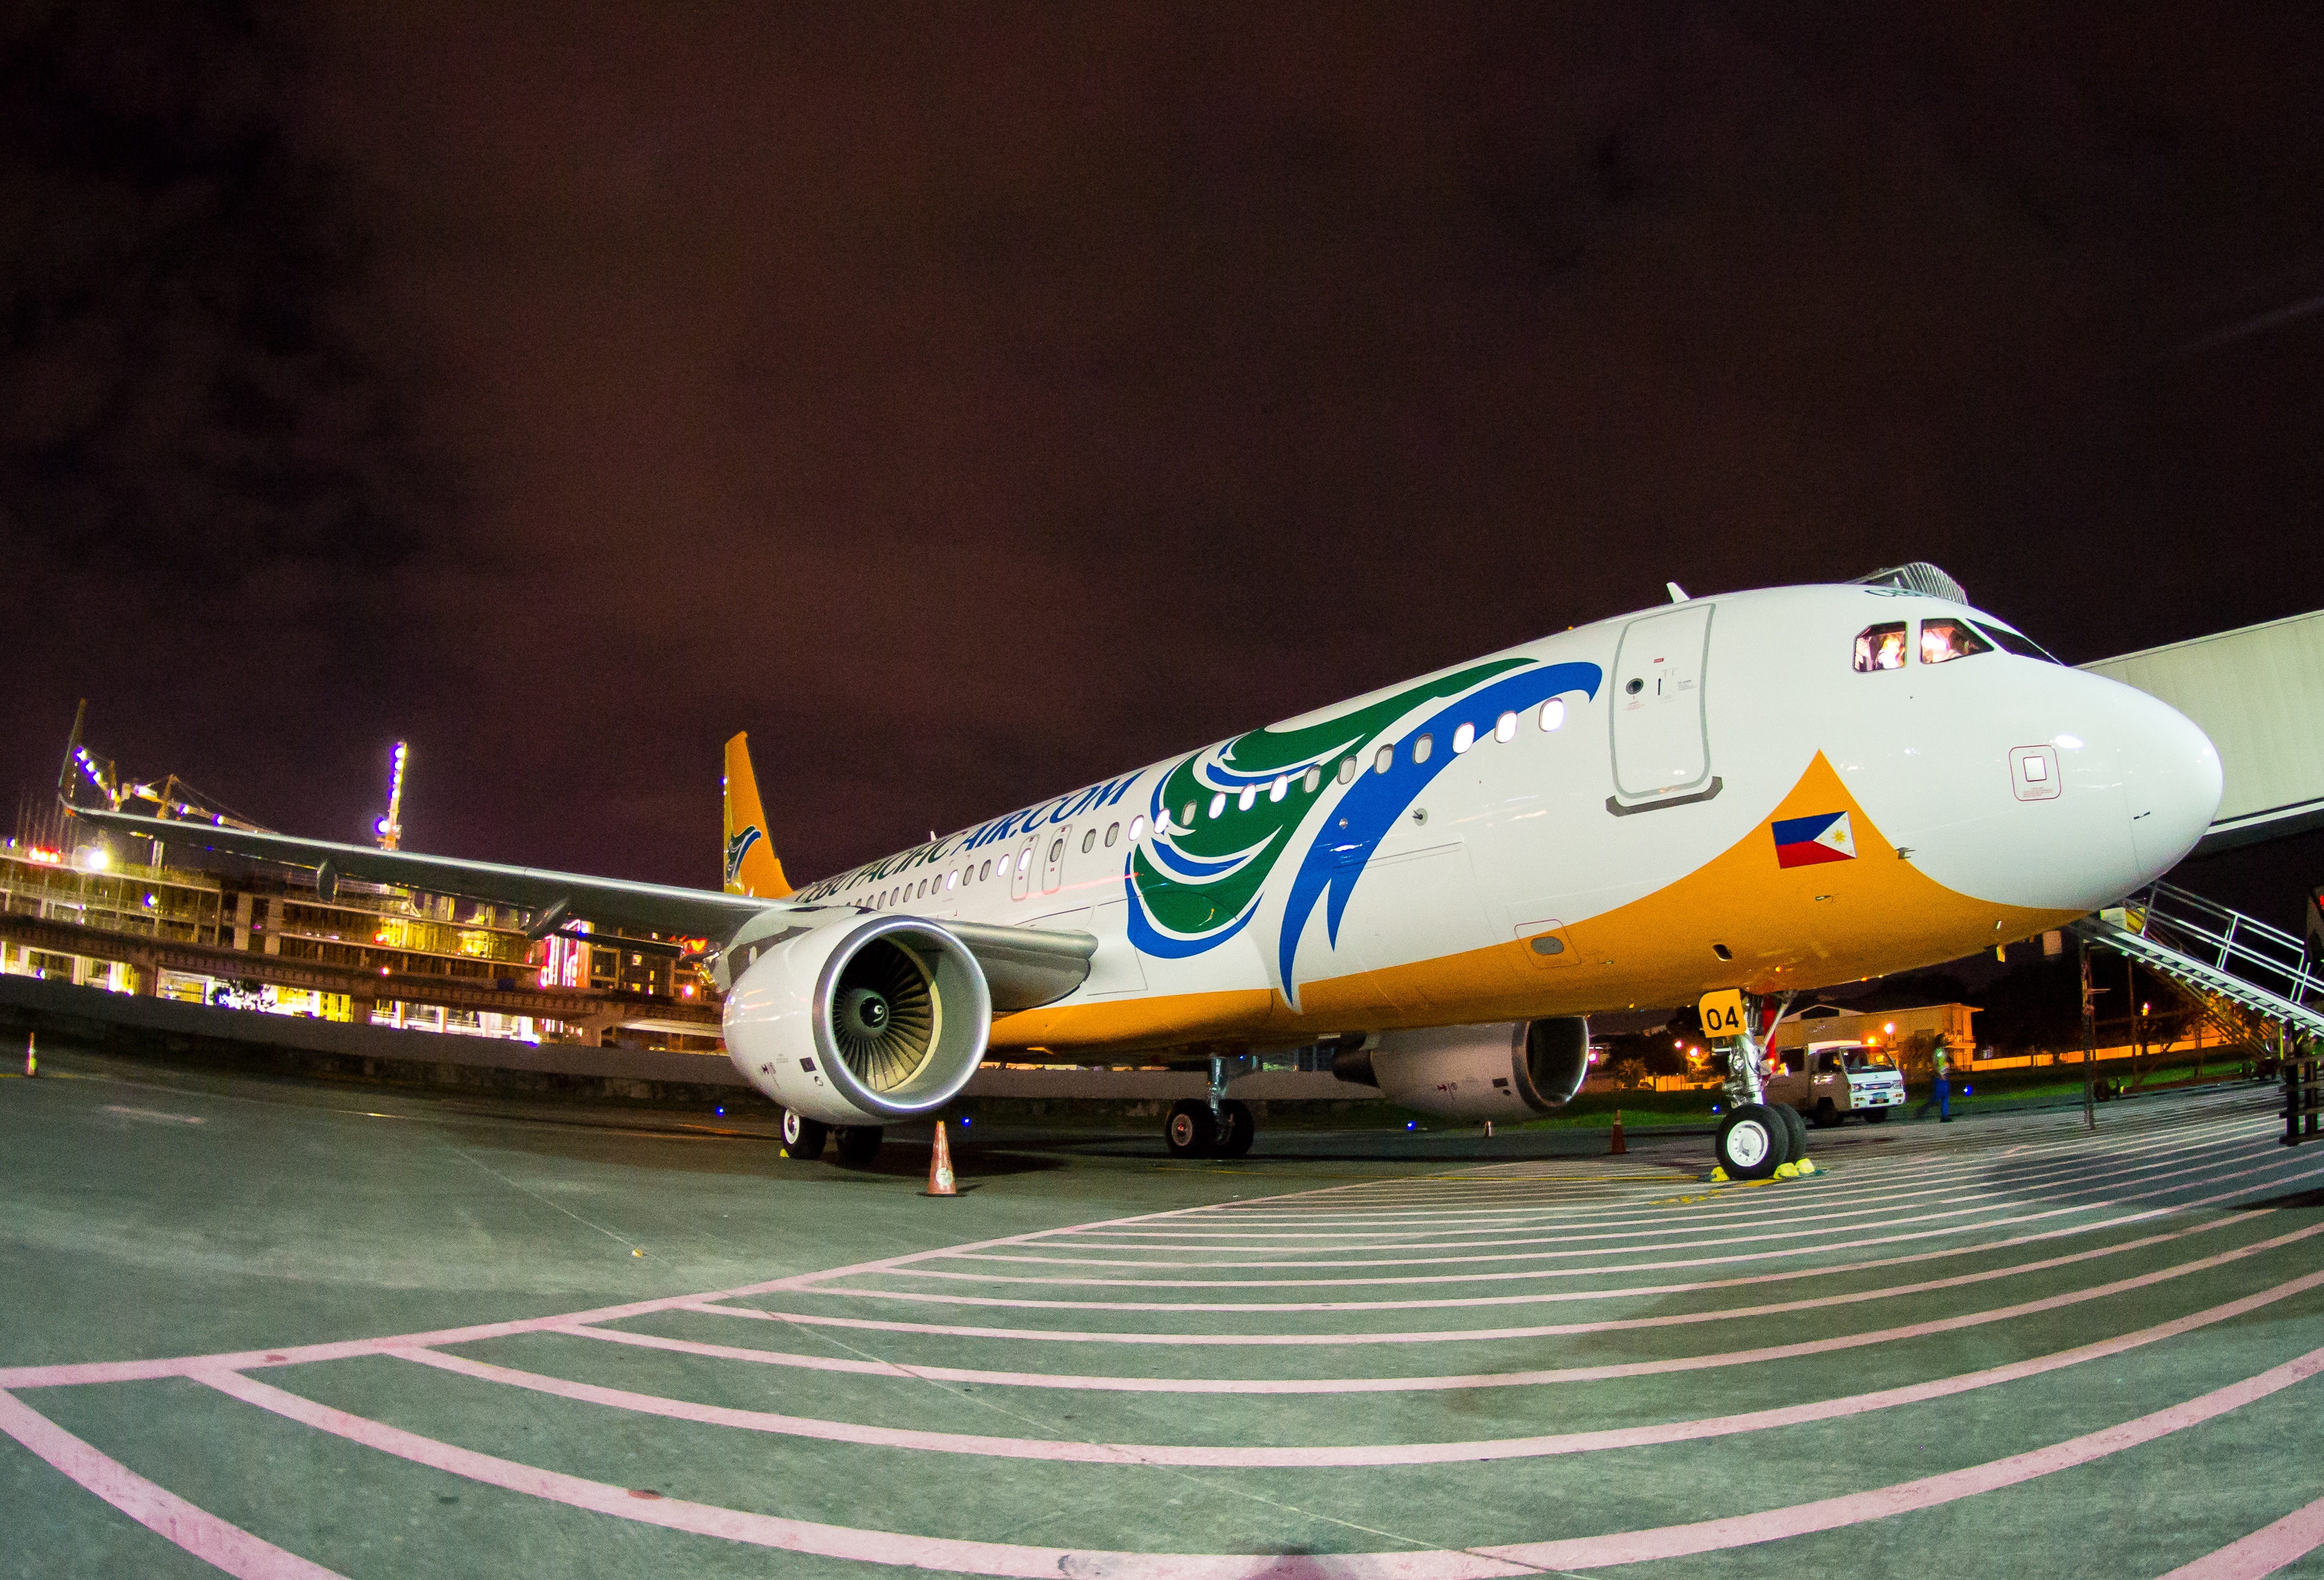 NEW AIRCRAFT. This is the 3rd of 4 Airbus A320 aircraft that the airline is set to receive this year, Cebu Pacific announces on Monday, September 28, 2015. Photo from Ajig Ibasco / Cebu Pacific   